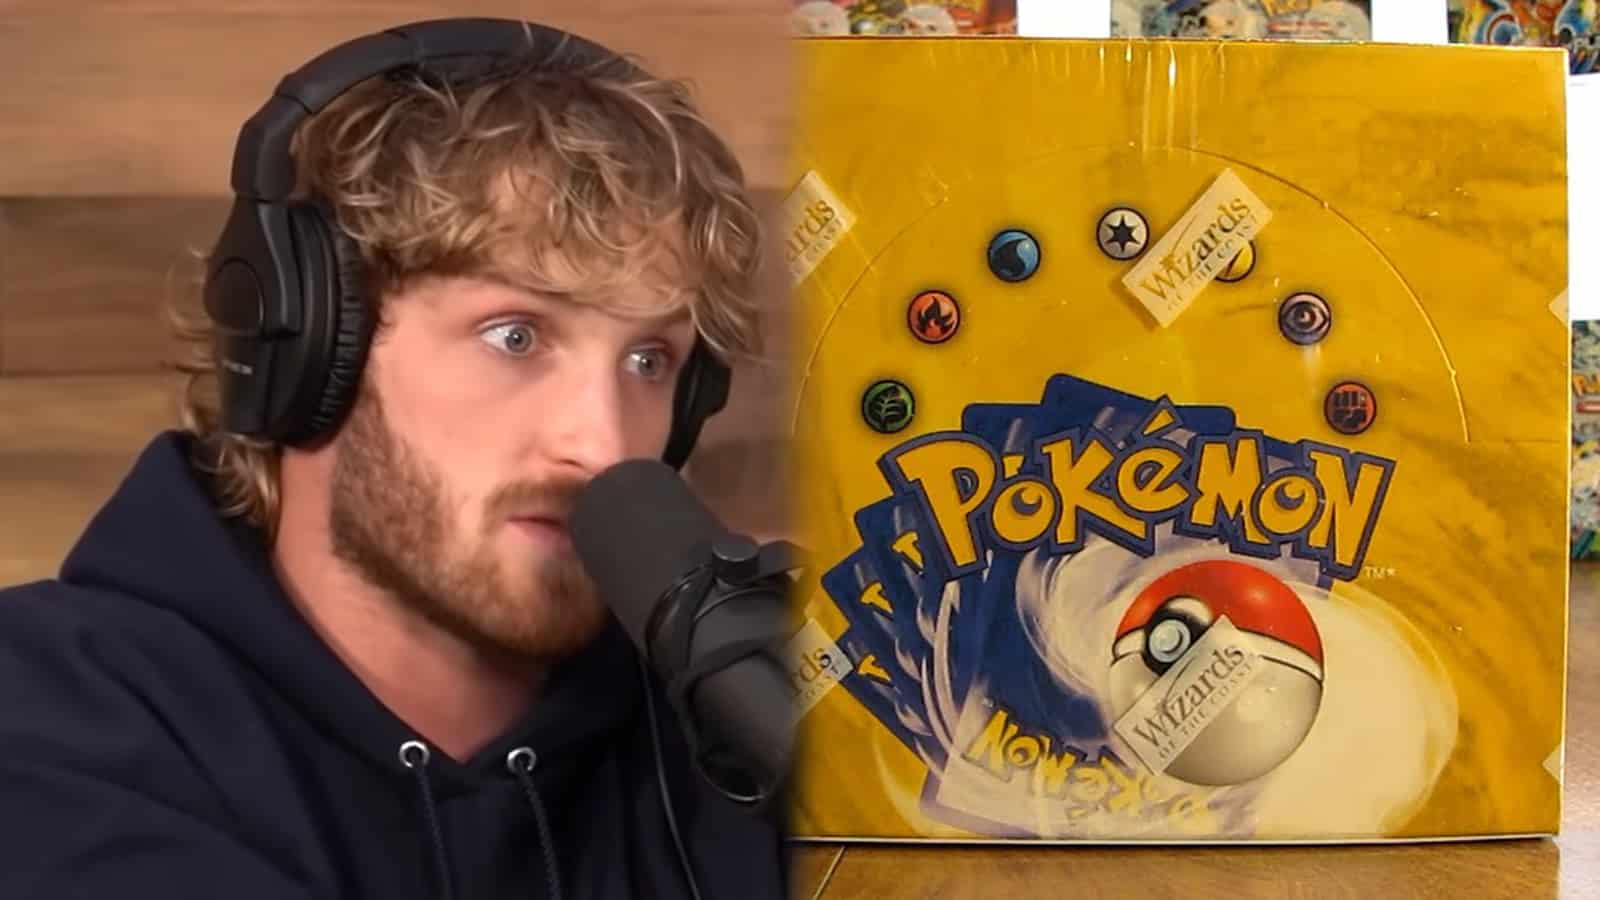 Logan Paul owns $5.275 million Pokémon card after record-breaking trade